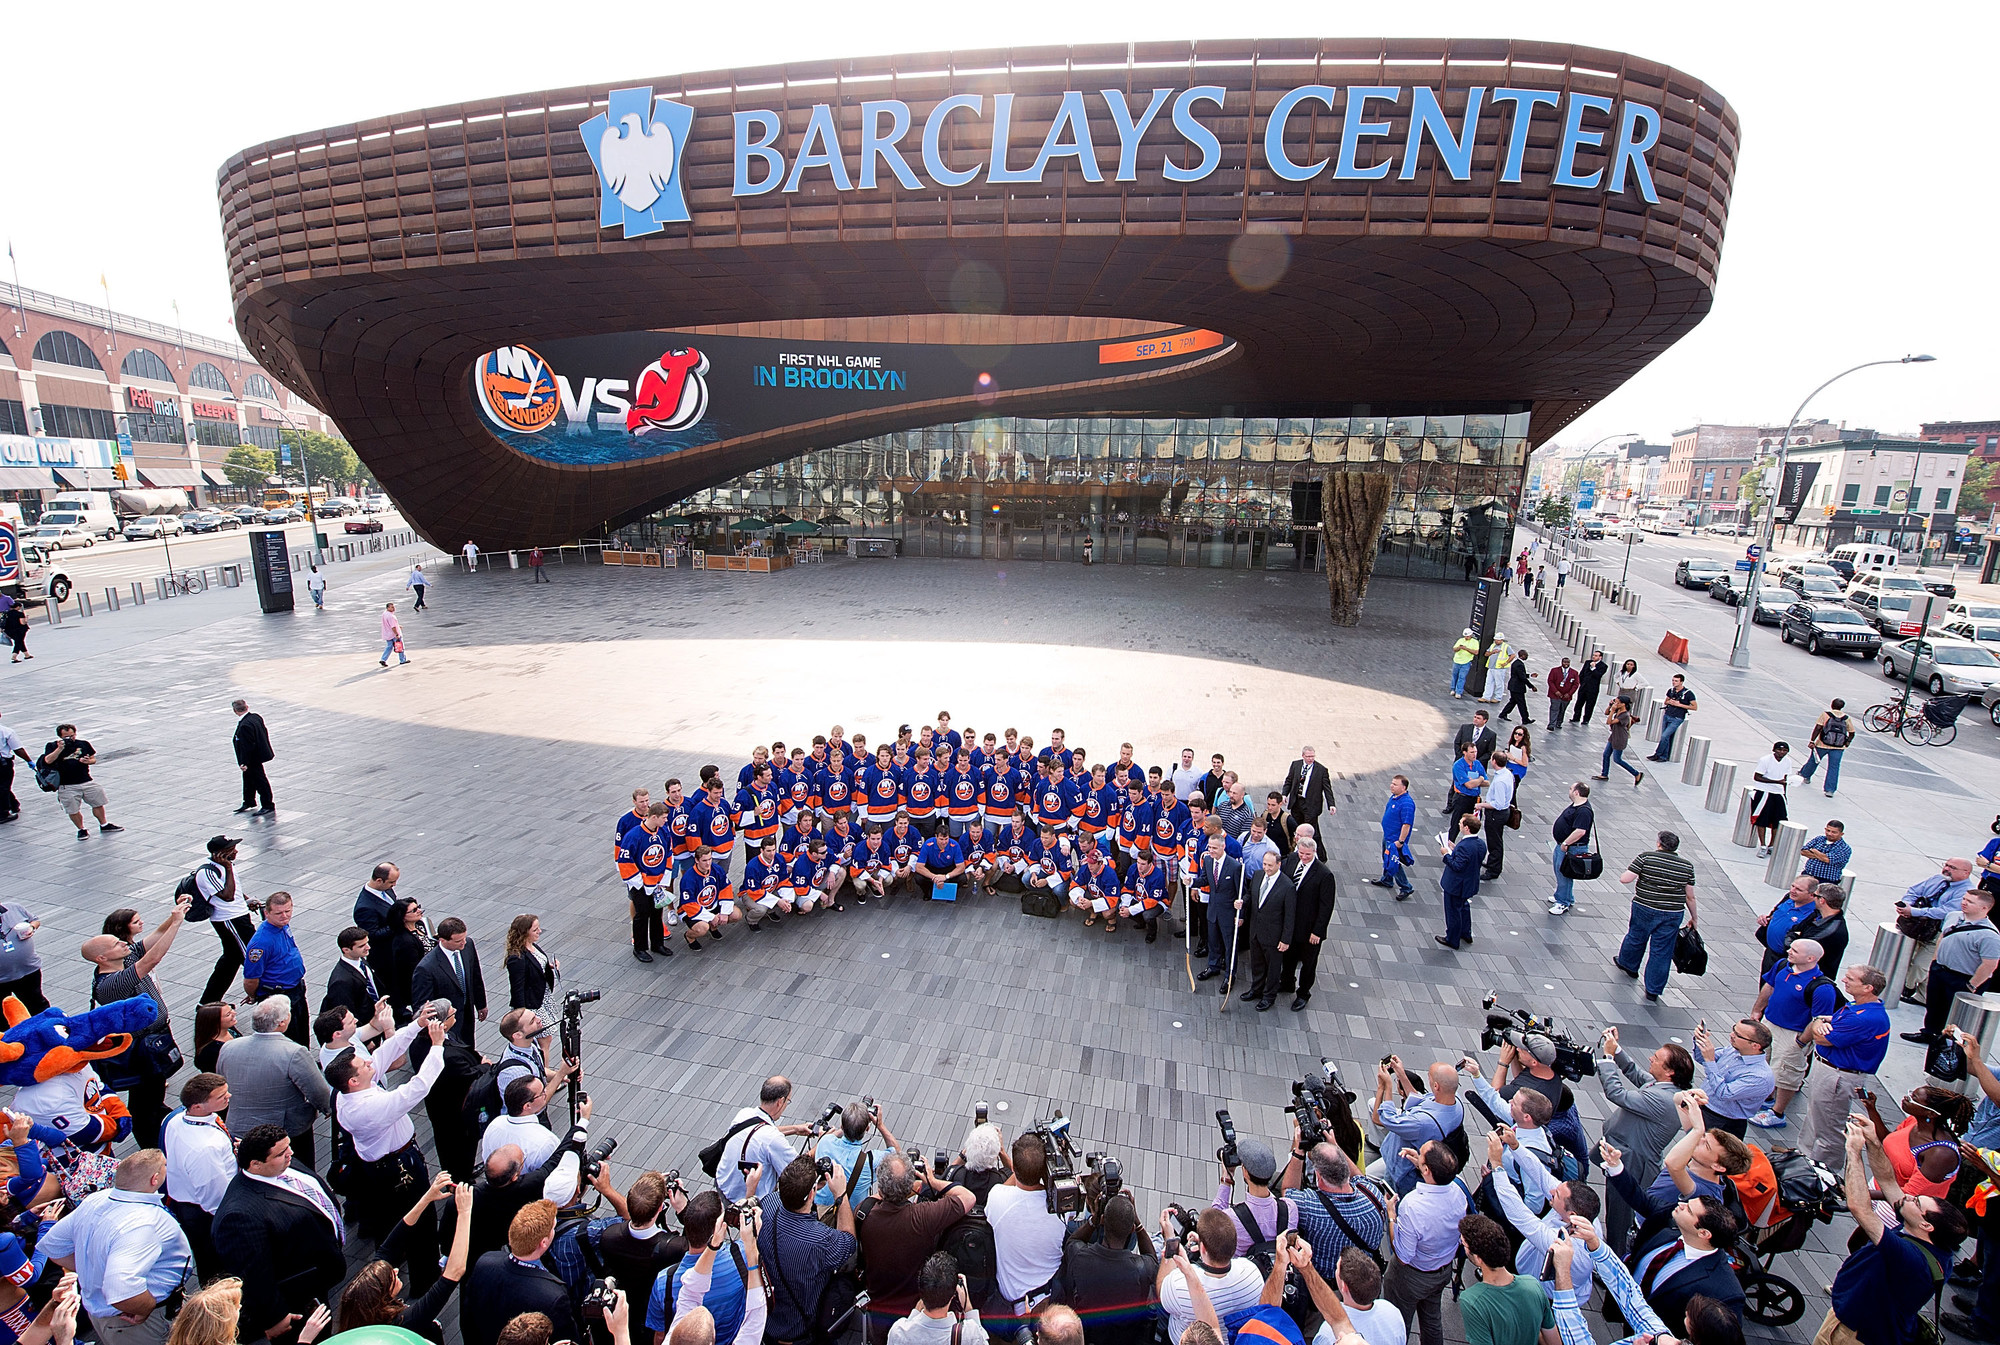 The New York Islanders gathered outside their future home, Brooklyn's Barclays Center, before their 2013 preseason game in the arena-the first NHL game to be played in Brooklyn